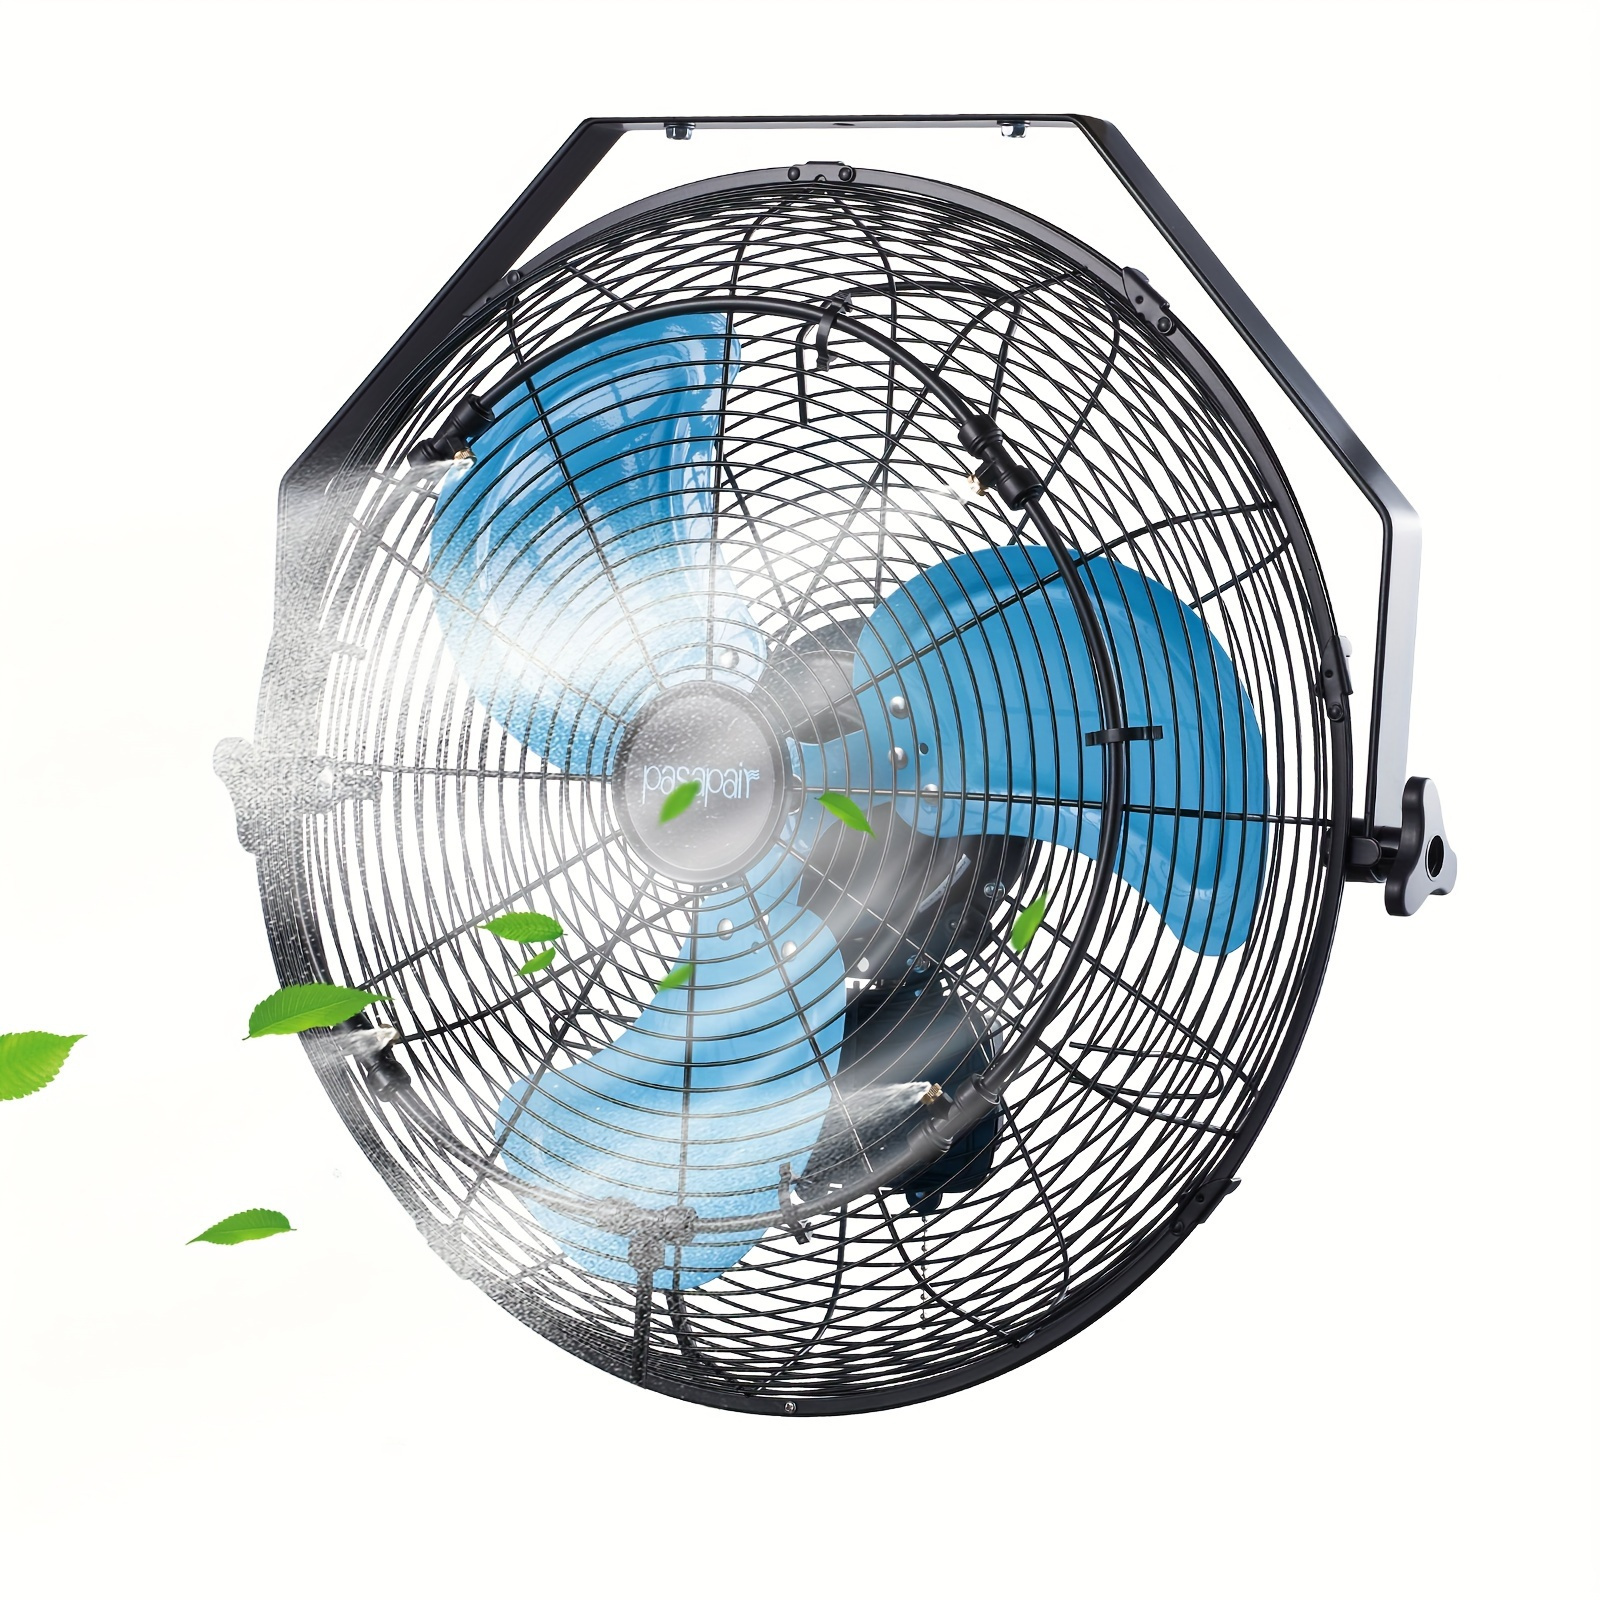 

18 Inch Wall Mounted Fan, Industrial Misting , Etl Listed, 8.2ft Cord & Gfci Plug, For Industrial, Garage, Greenhouse